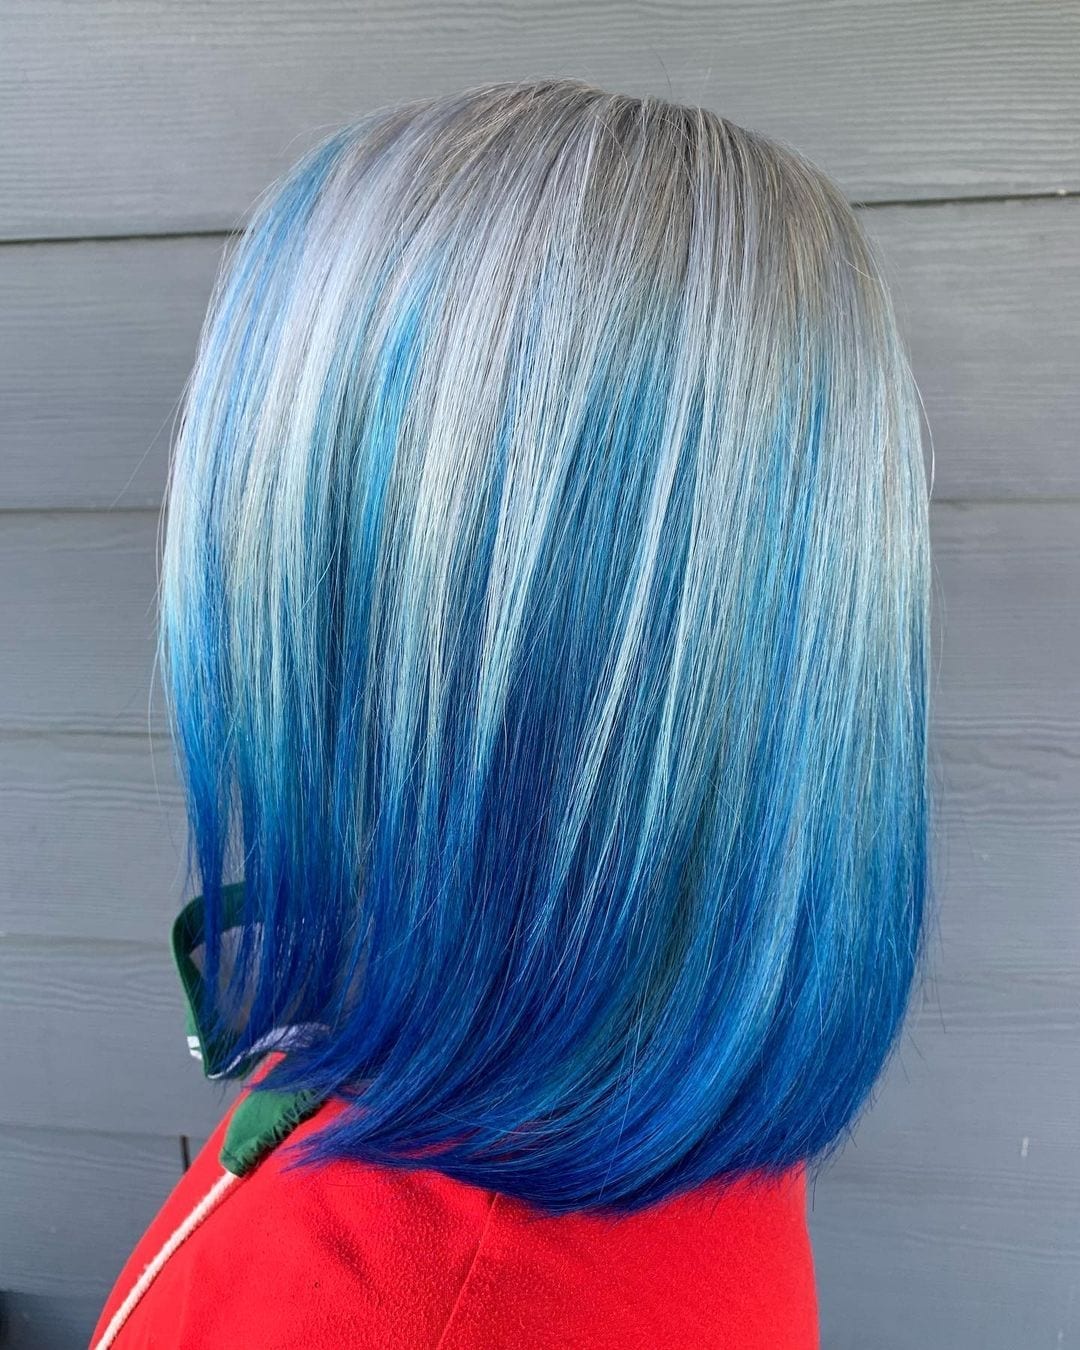 Person with long hair that is blue and fades to grey at the roots